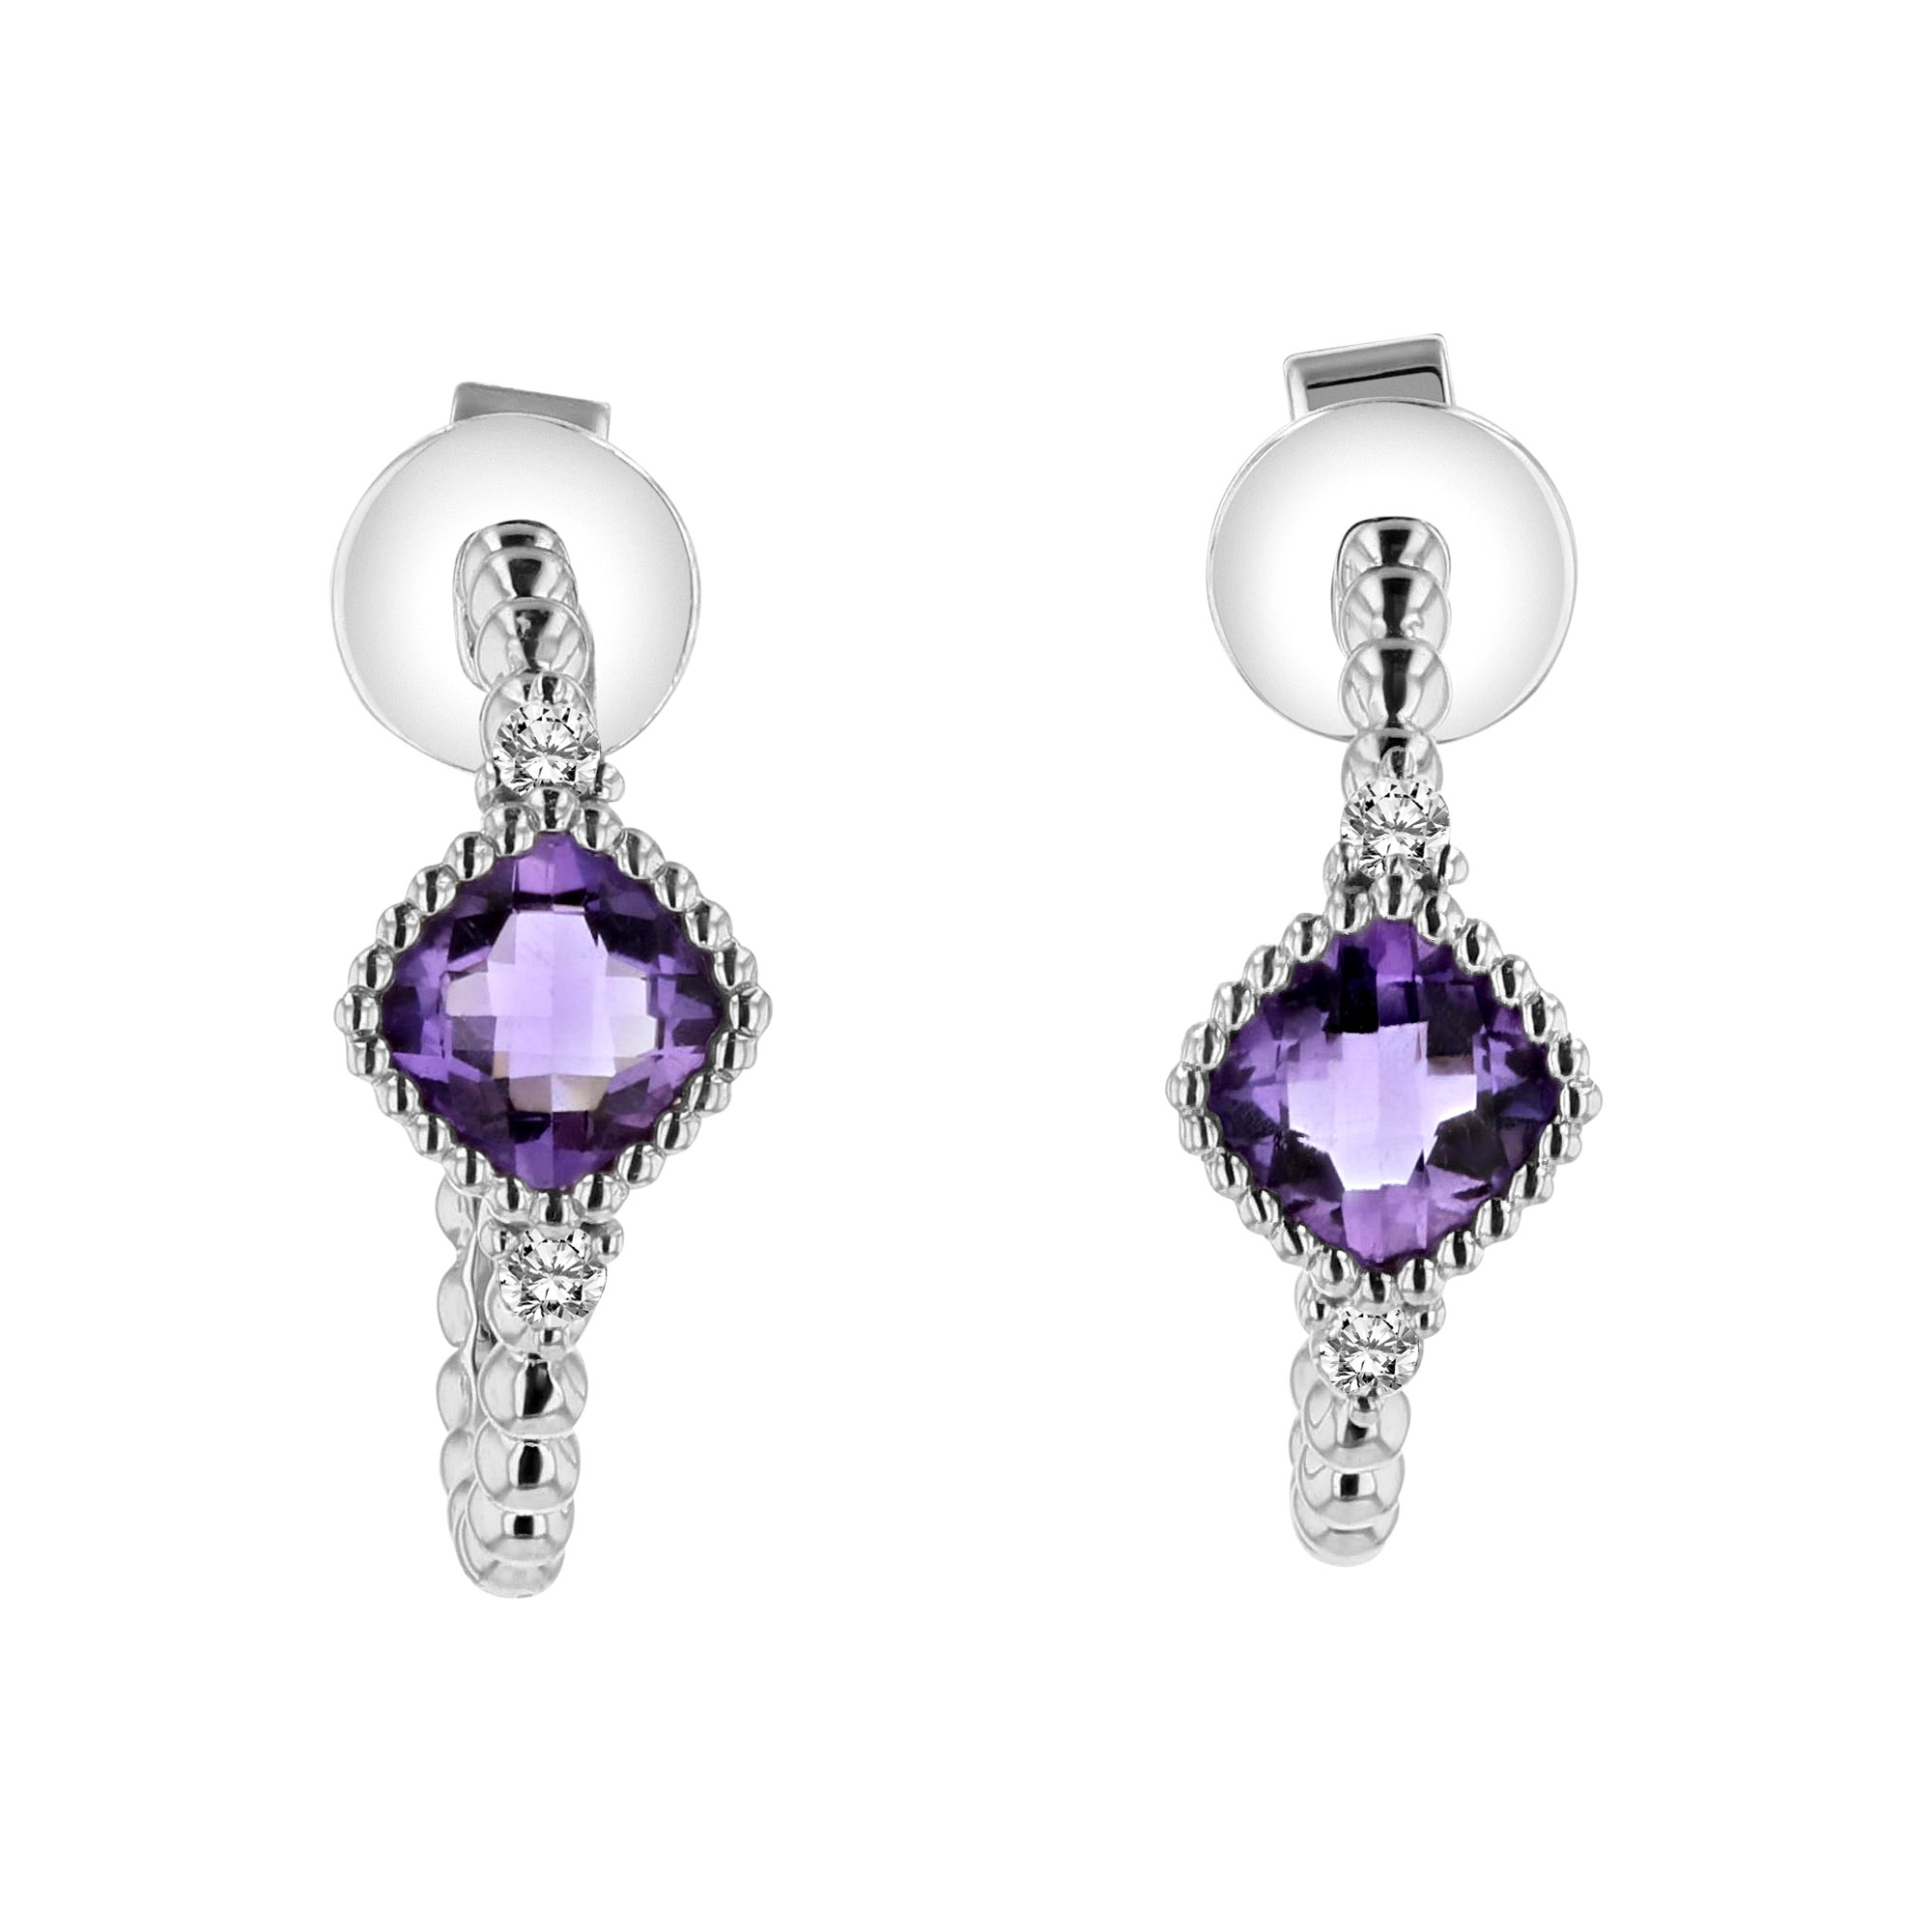 View 0.06ctw Diamond and Amethyst Earring in 14k White Gold